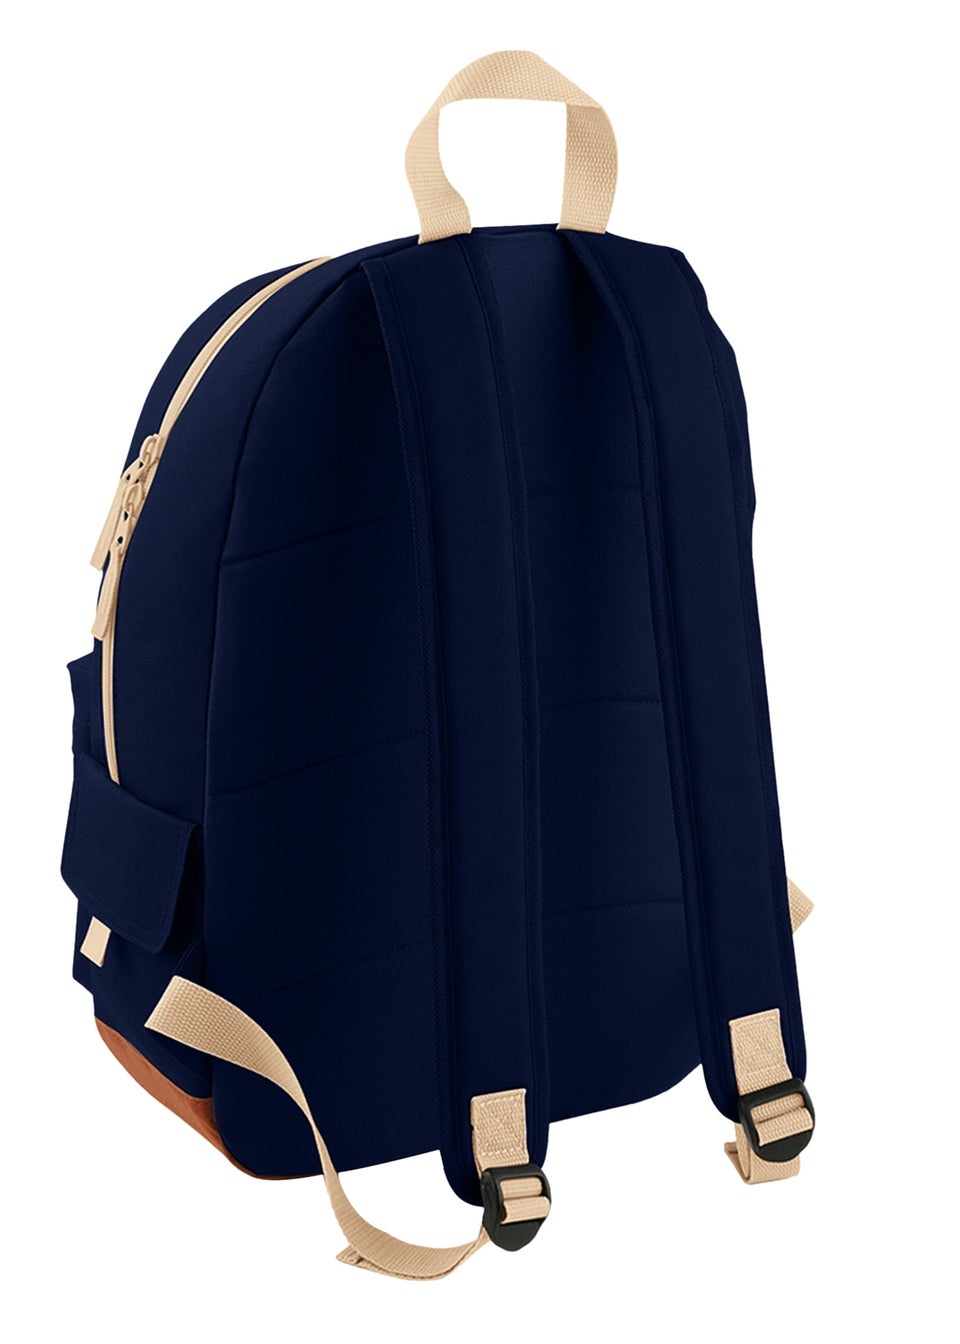 BagBase Navy Heritage Retro Backpack (18 Litres)